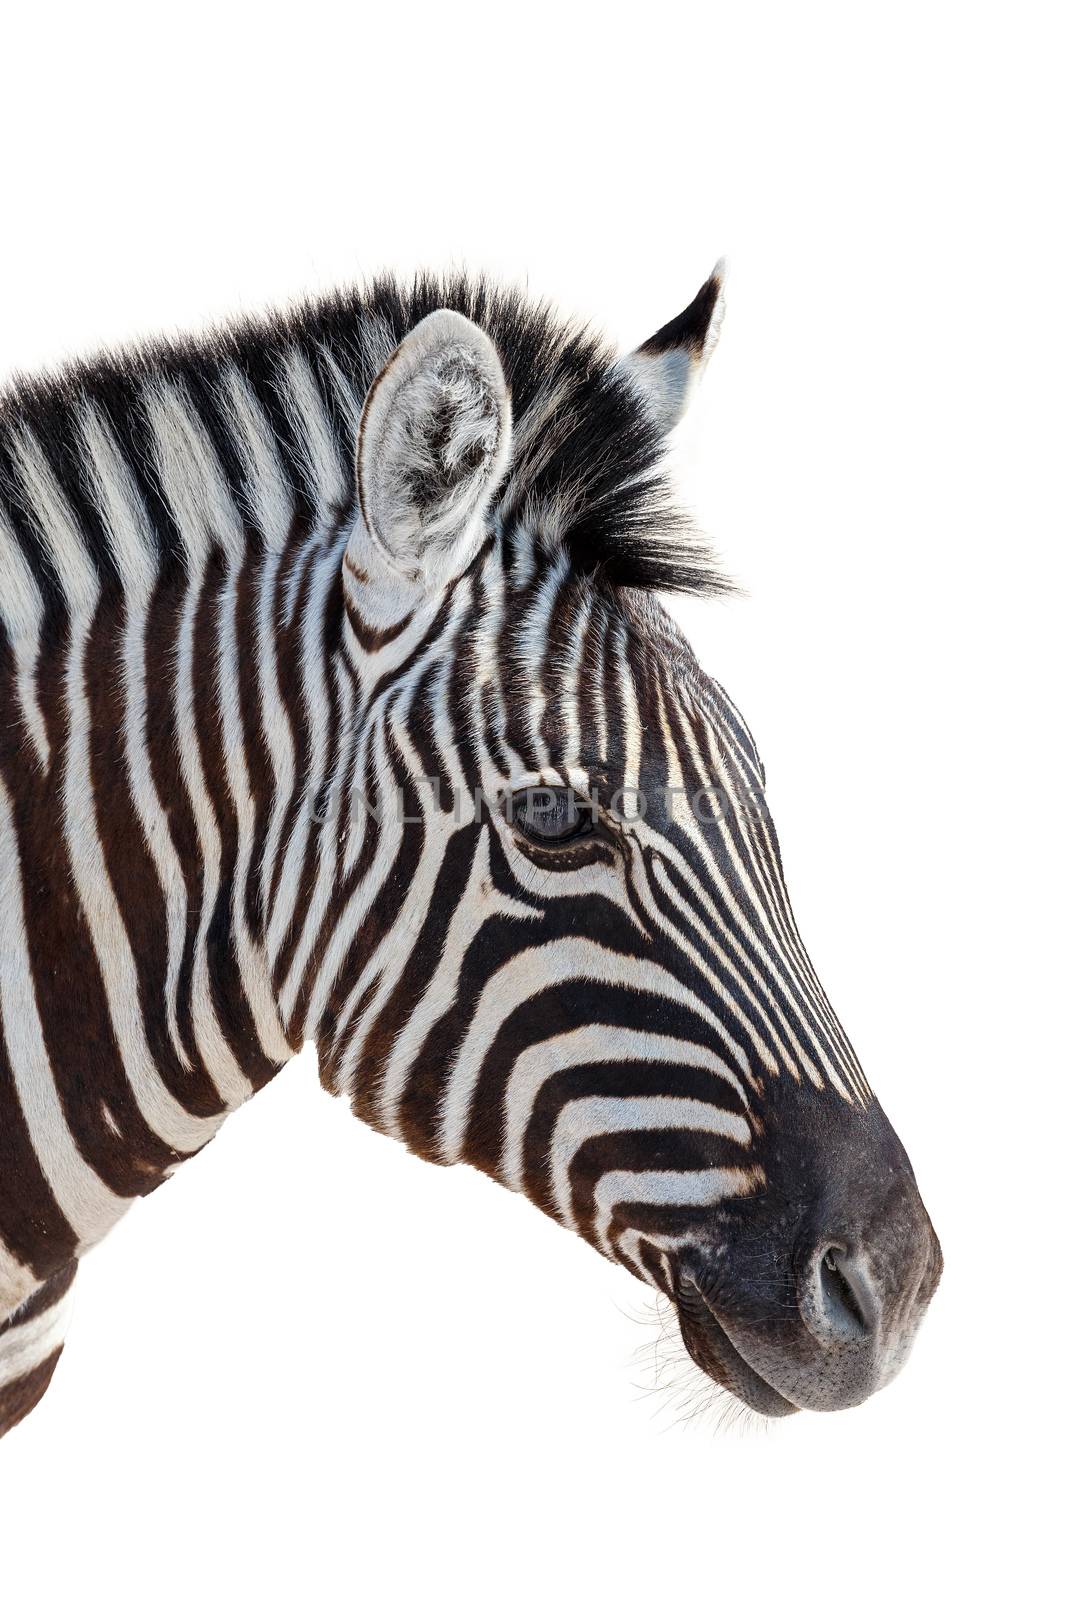 head of a zebra isolated in white background by artush